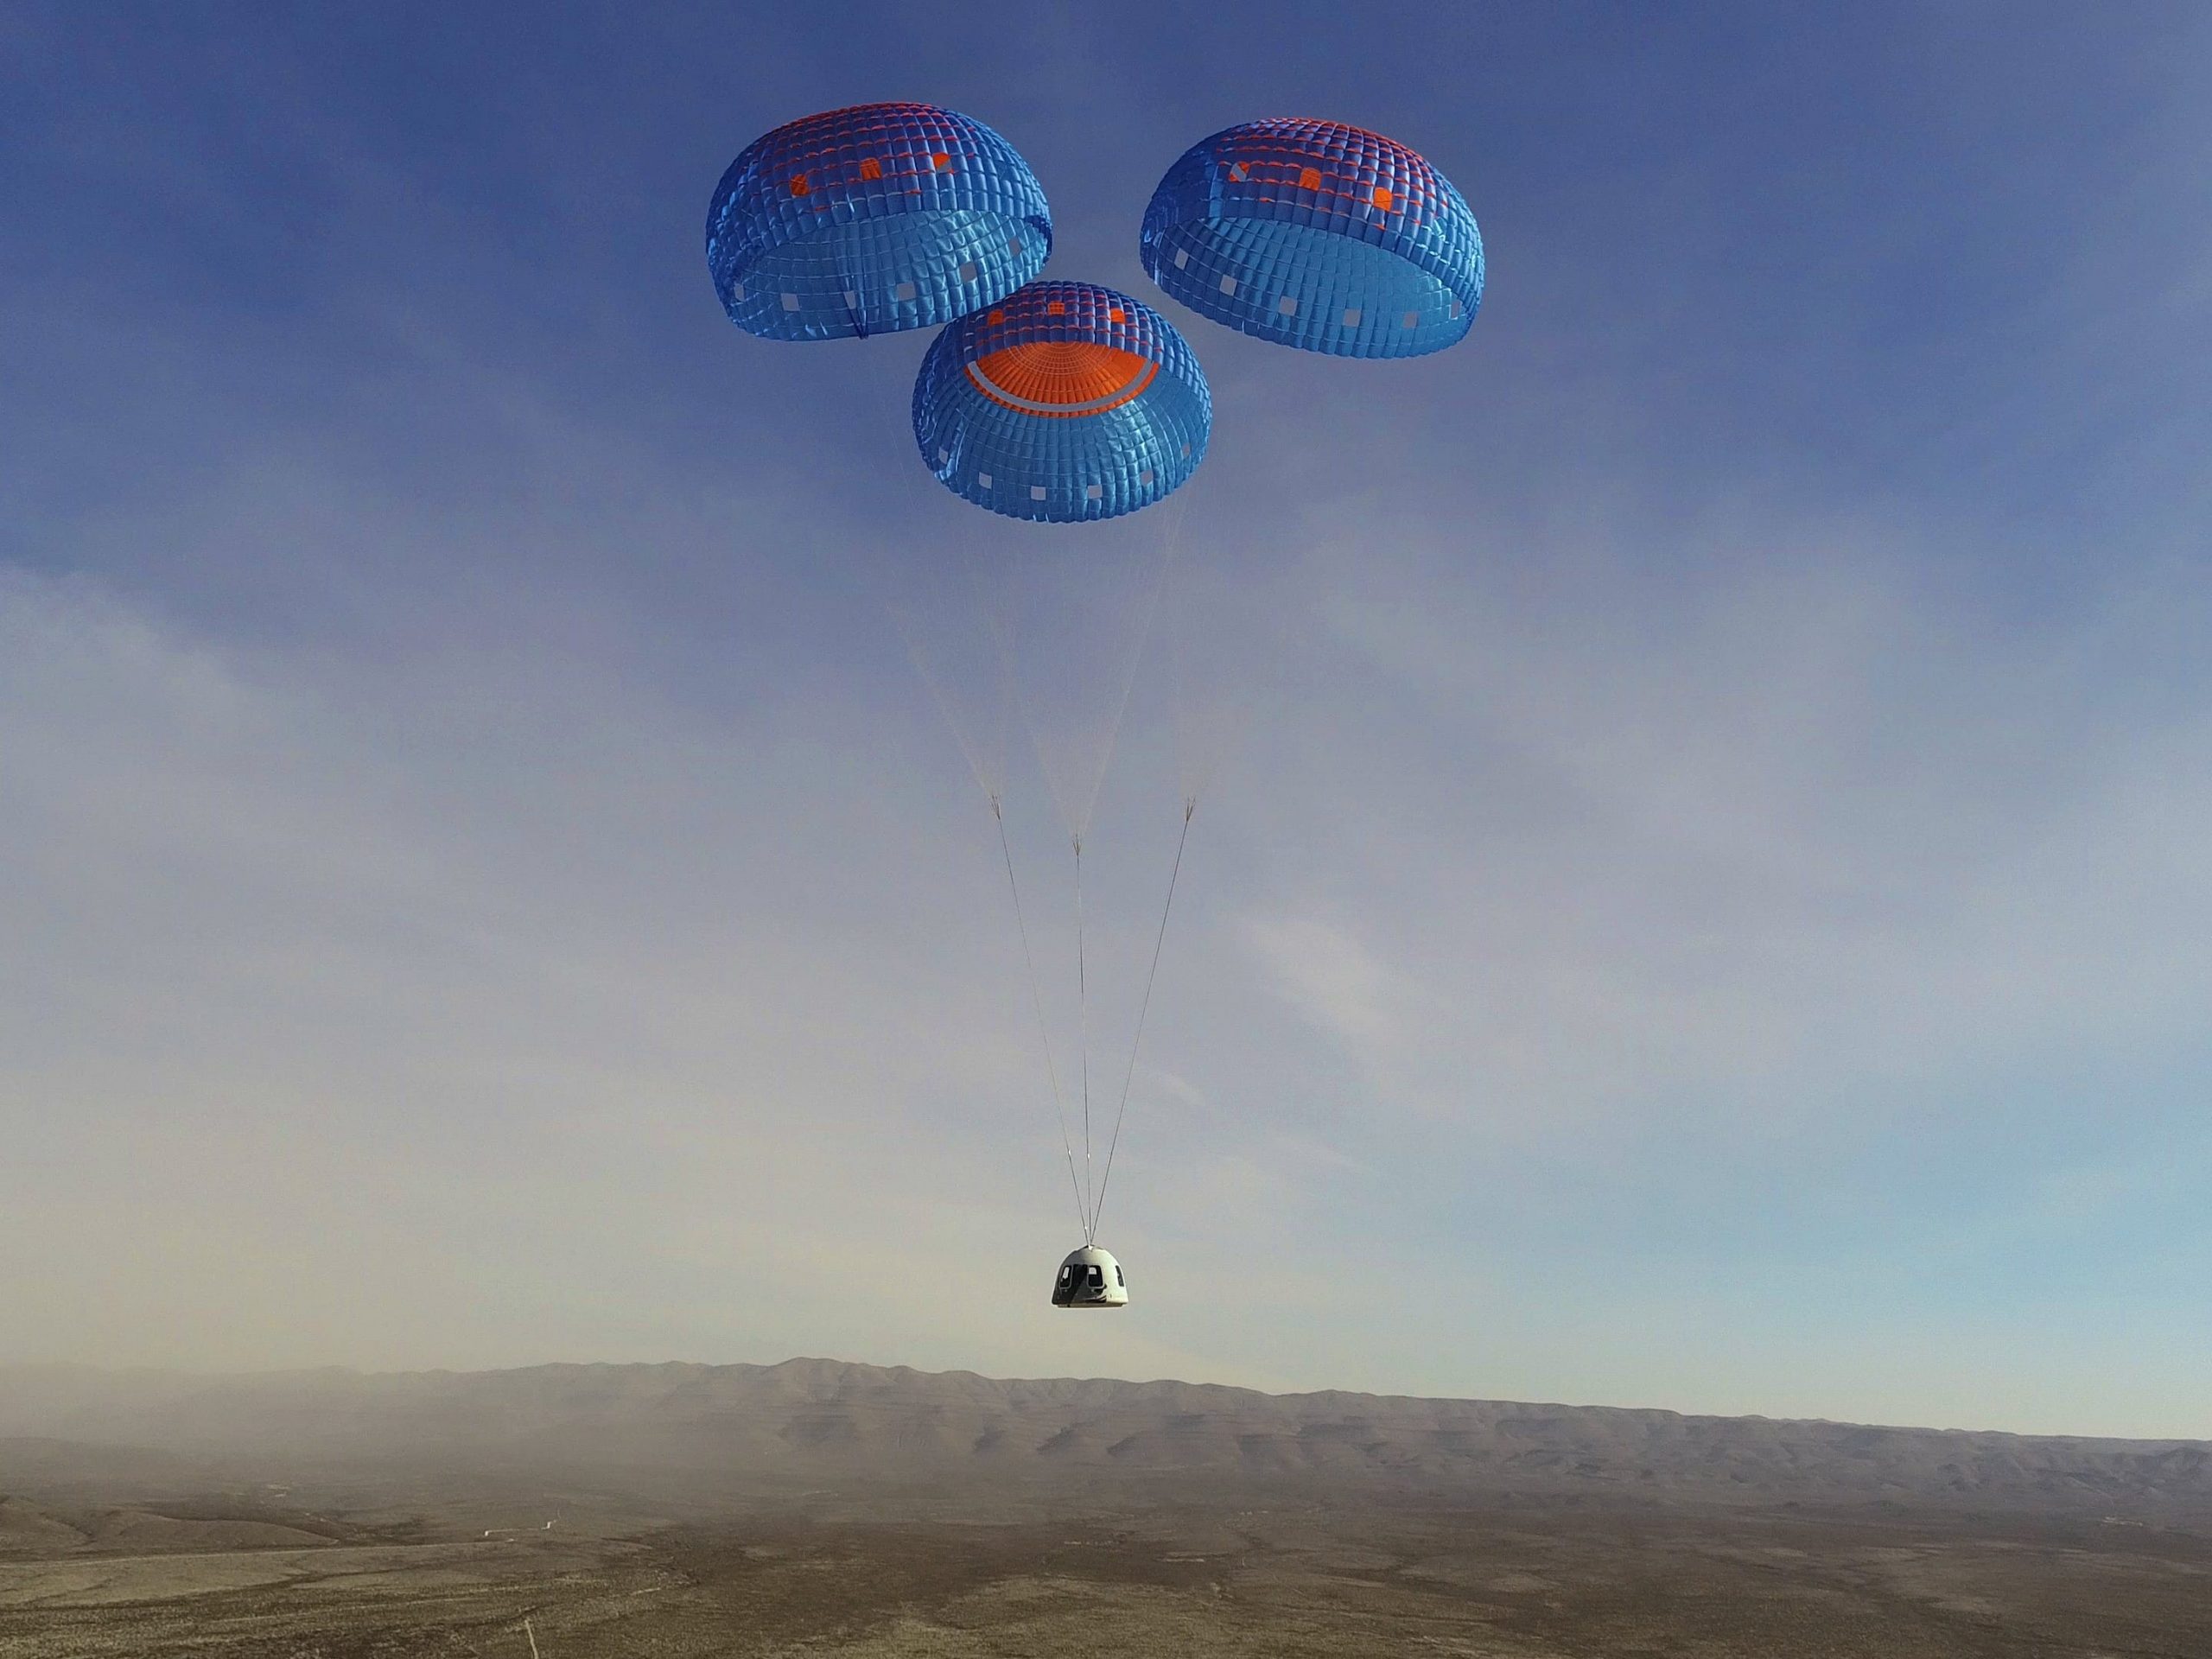 The New Shepard crew capsule parachutes to a landing at Blue Origin's Launch Site One in Texas on January 14.